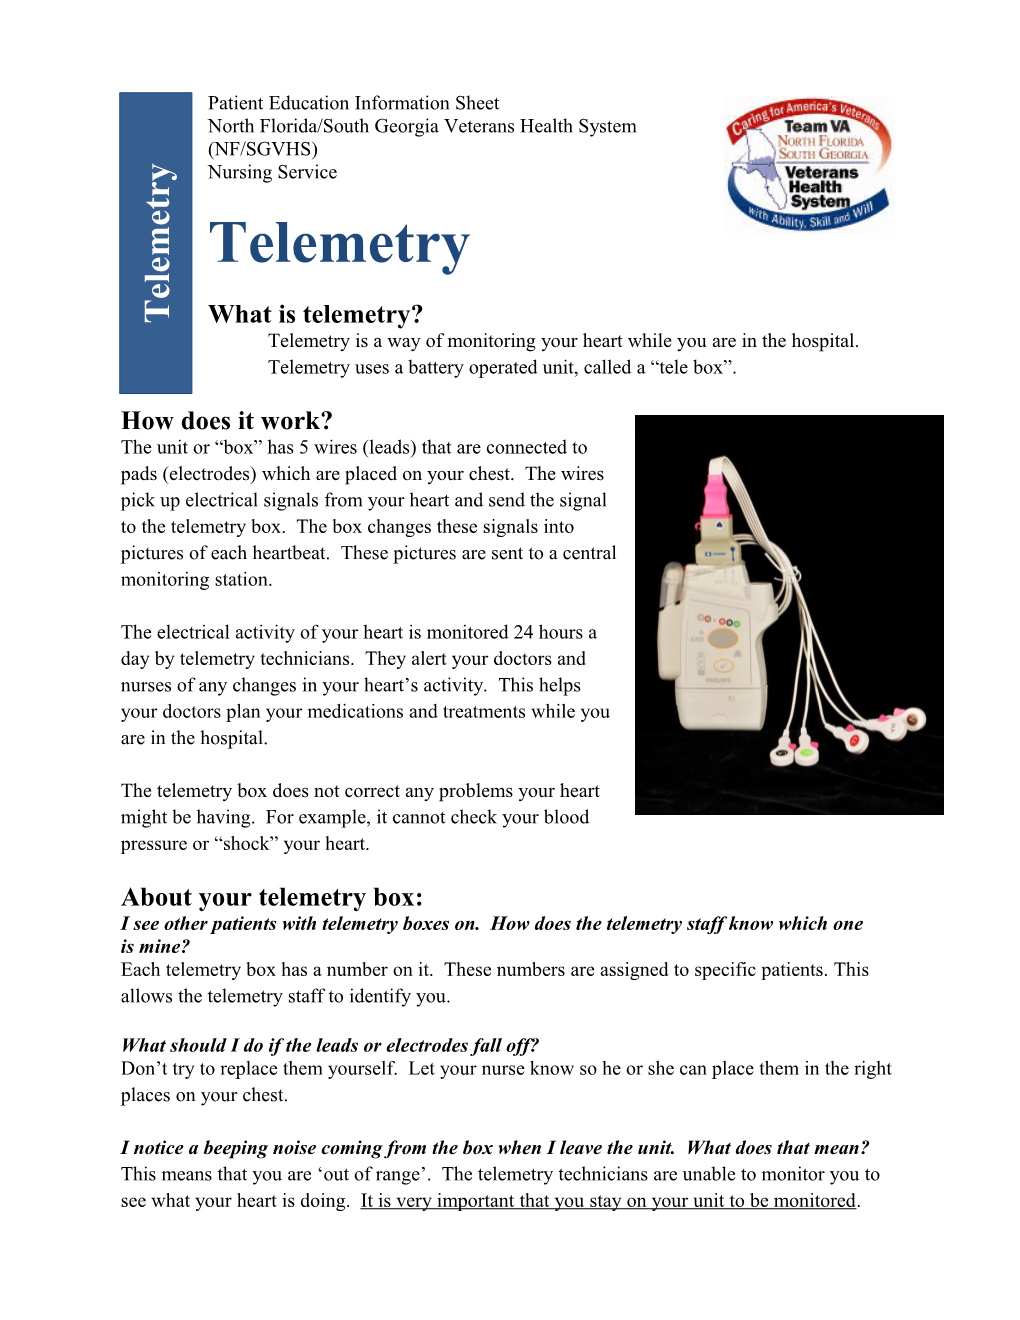 A Patient Education Guide to Telemetry